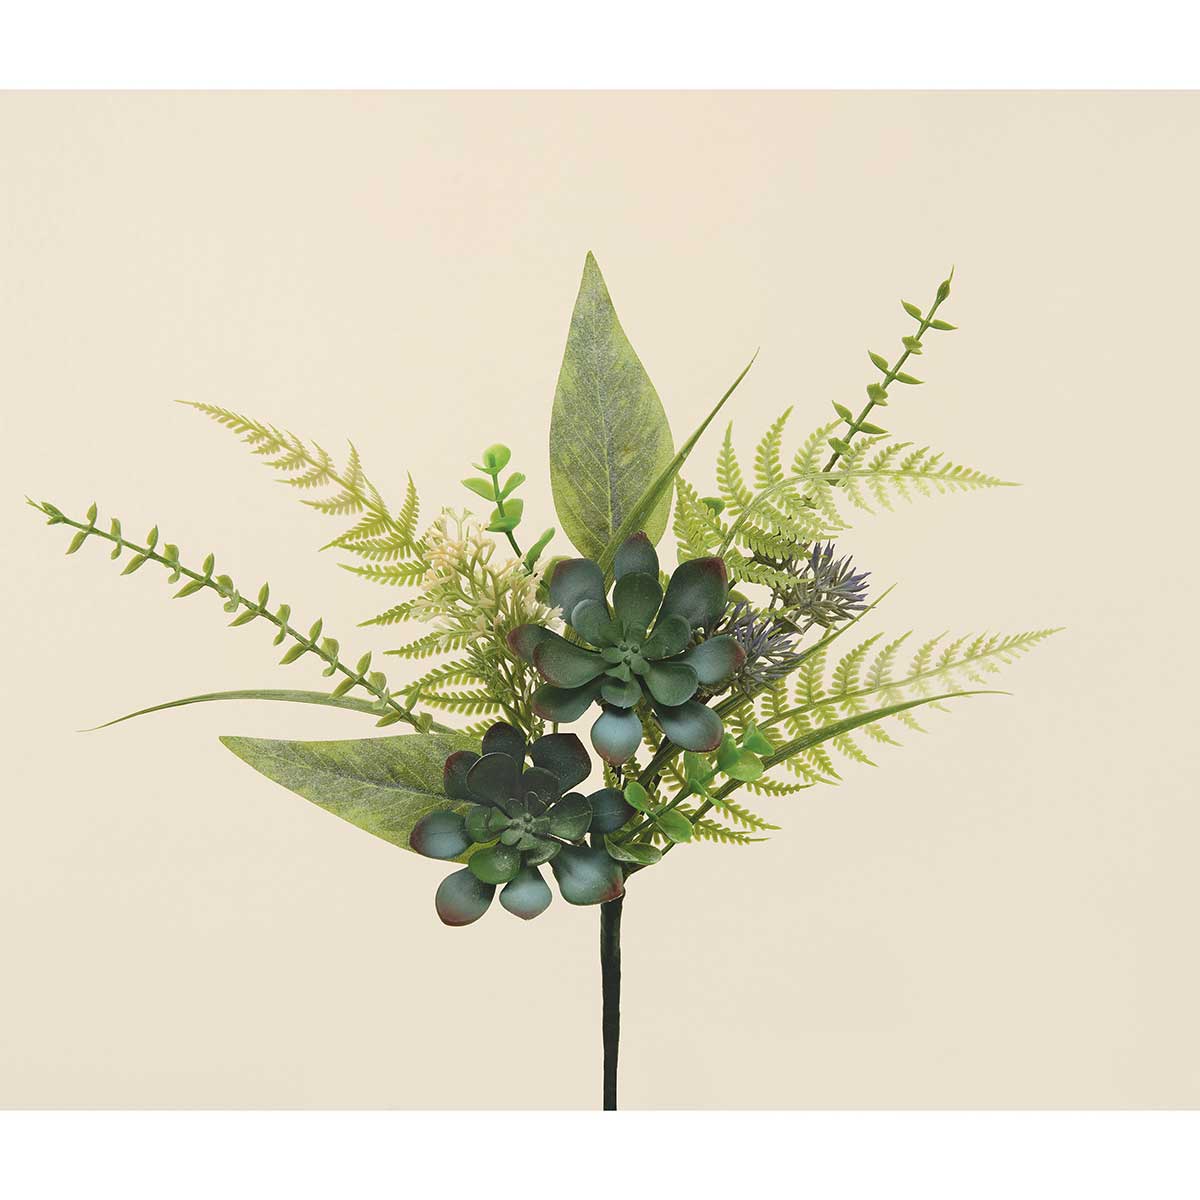 PIK SUCCULENT WITH FOLIAGE 11IN X 13IN - Click Image to Close